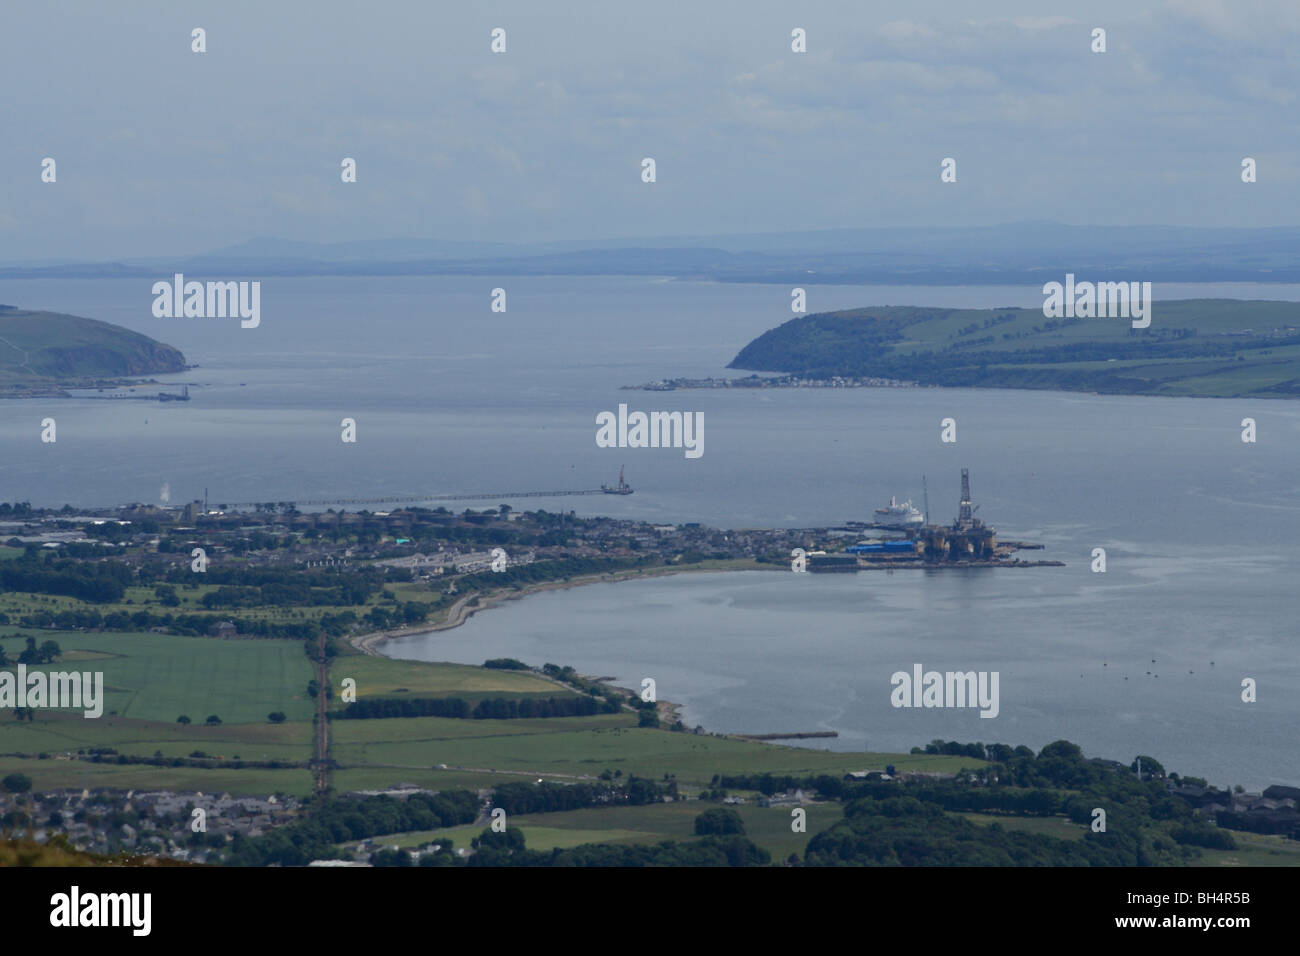 View of Cromarty Firth looking out to the North Sea with Alness, Cromarty, a cruise liner and oil rig construction works. Stock Photo